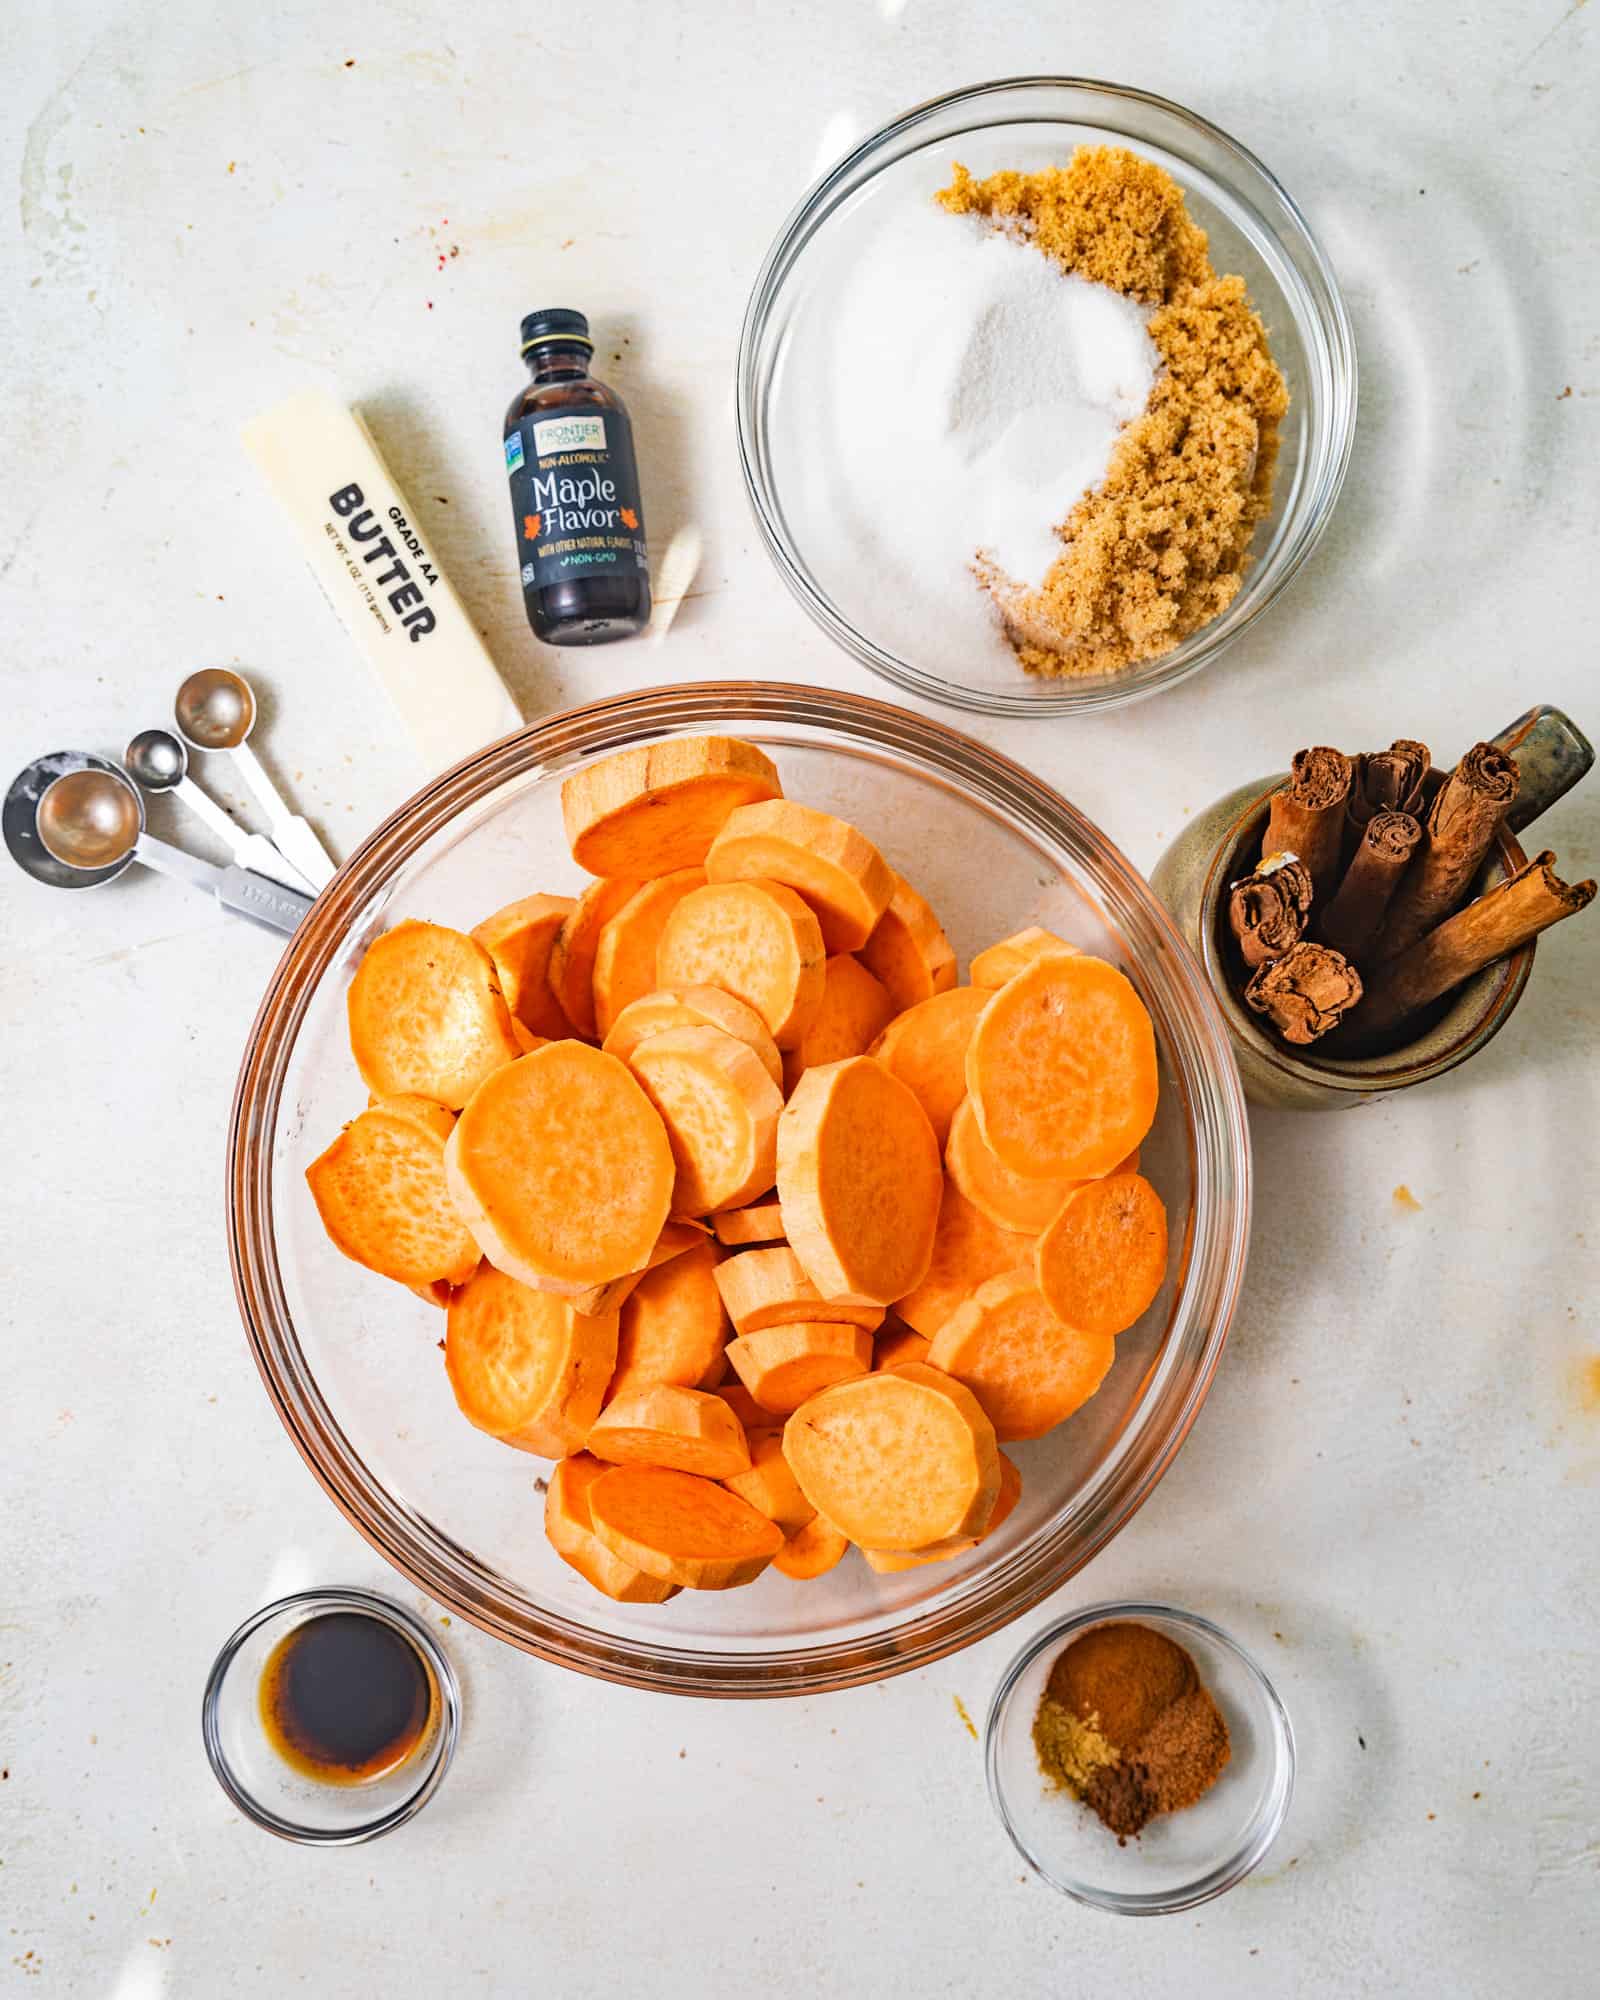 photo of ingredients needed to make candied yams - sugar, brown sugar, sweet potatoes, vanilla extract, maple extract, cinnamon, salt, nutmeg, ginger, and butter